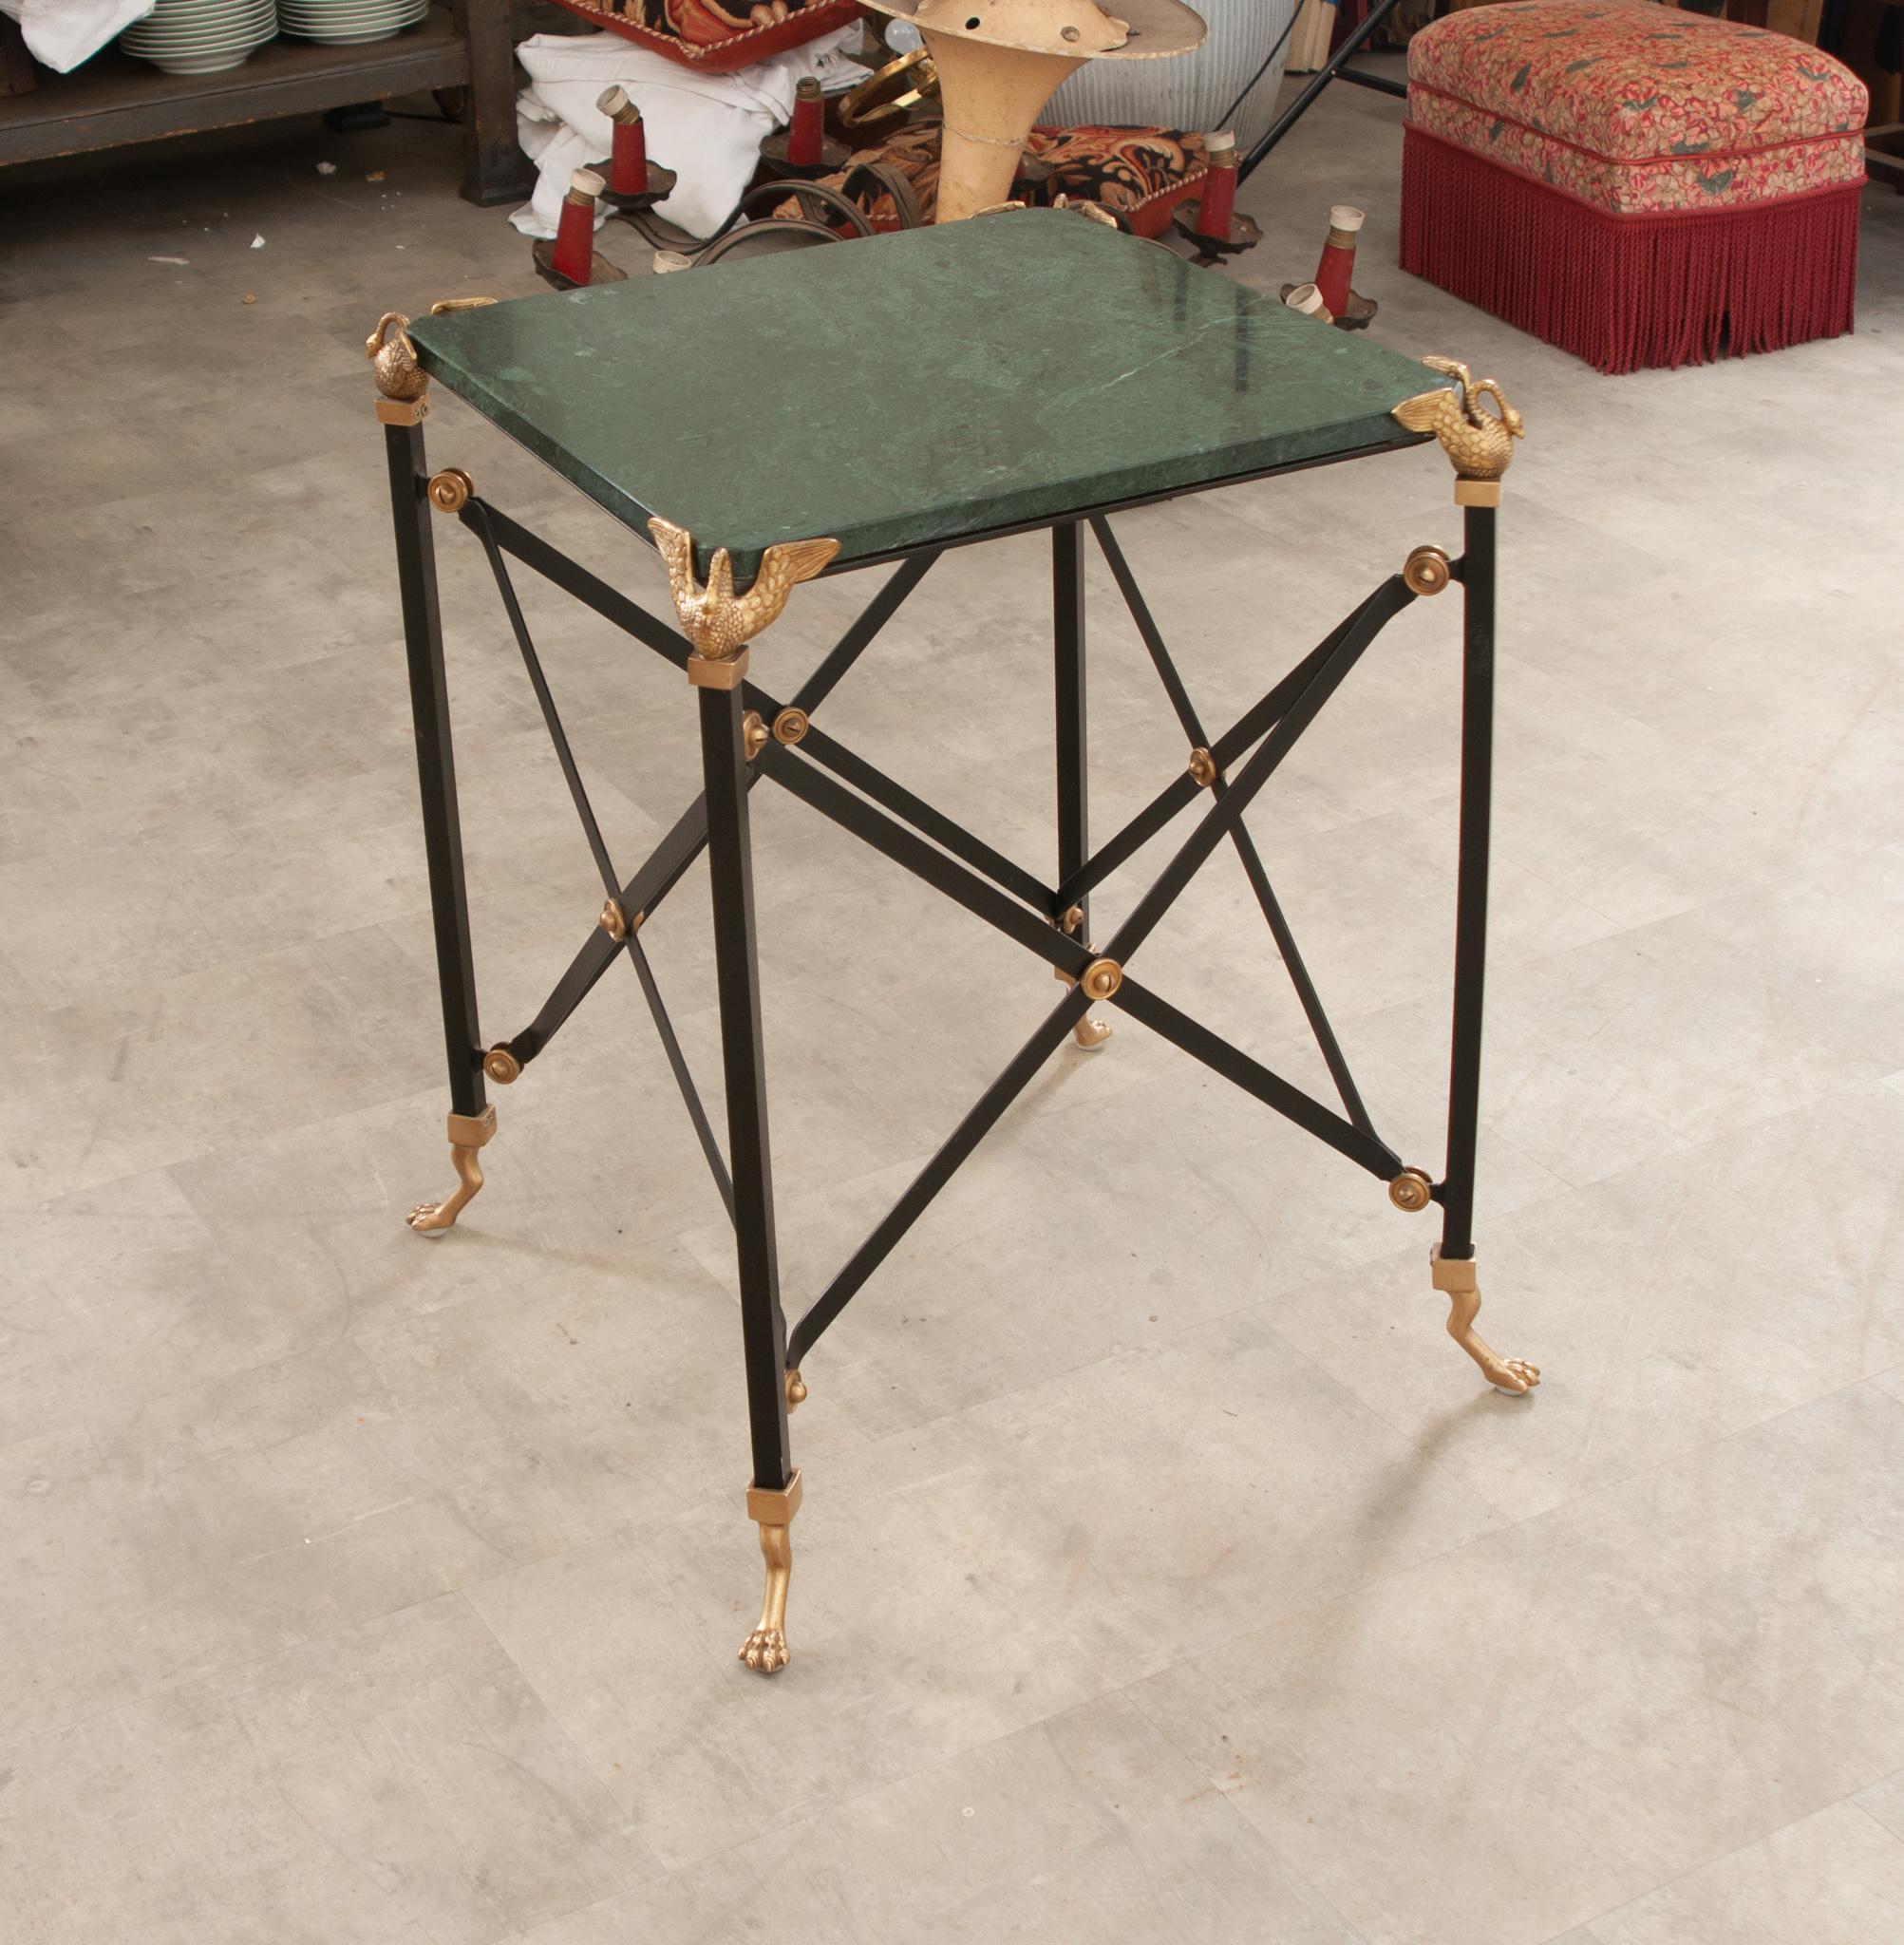 A vintage Empire style side table handcrafted in France. A wonderful square piece of emerald green marble featuring black veining and hazy white patterns sits atop a cast iron base with elongated legs topped with brass open wing swans and ending in